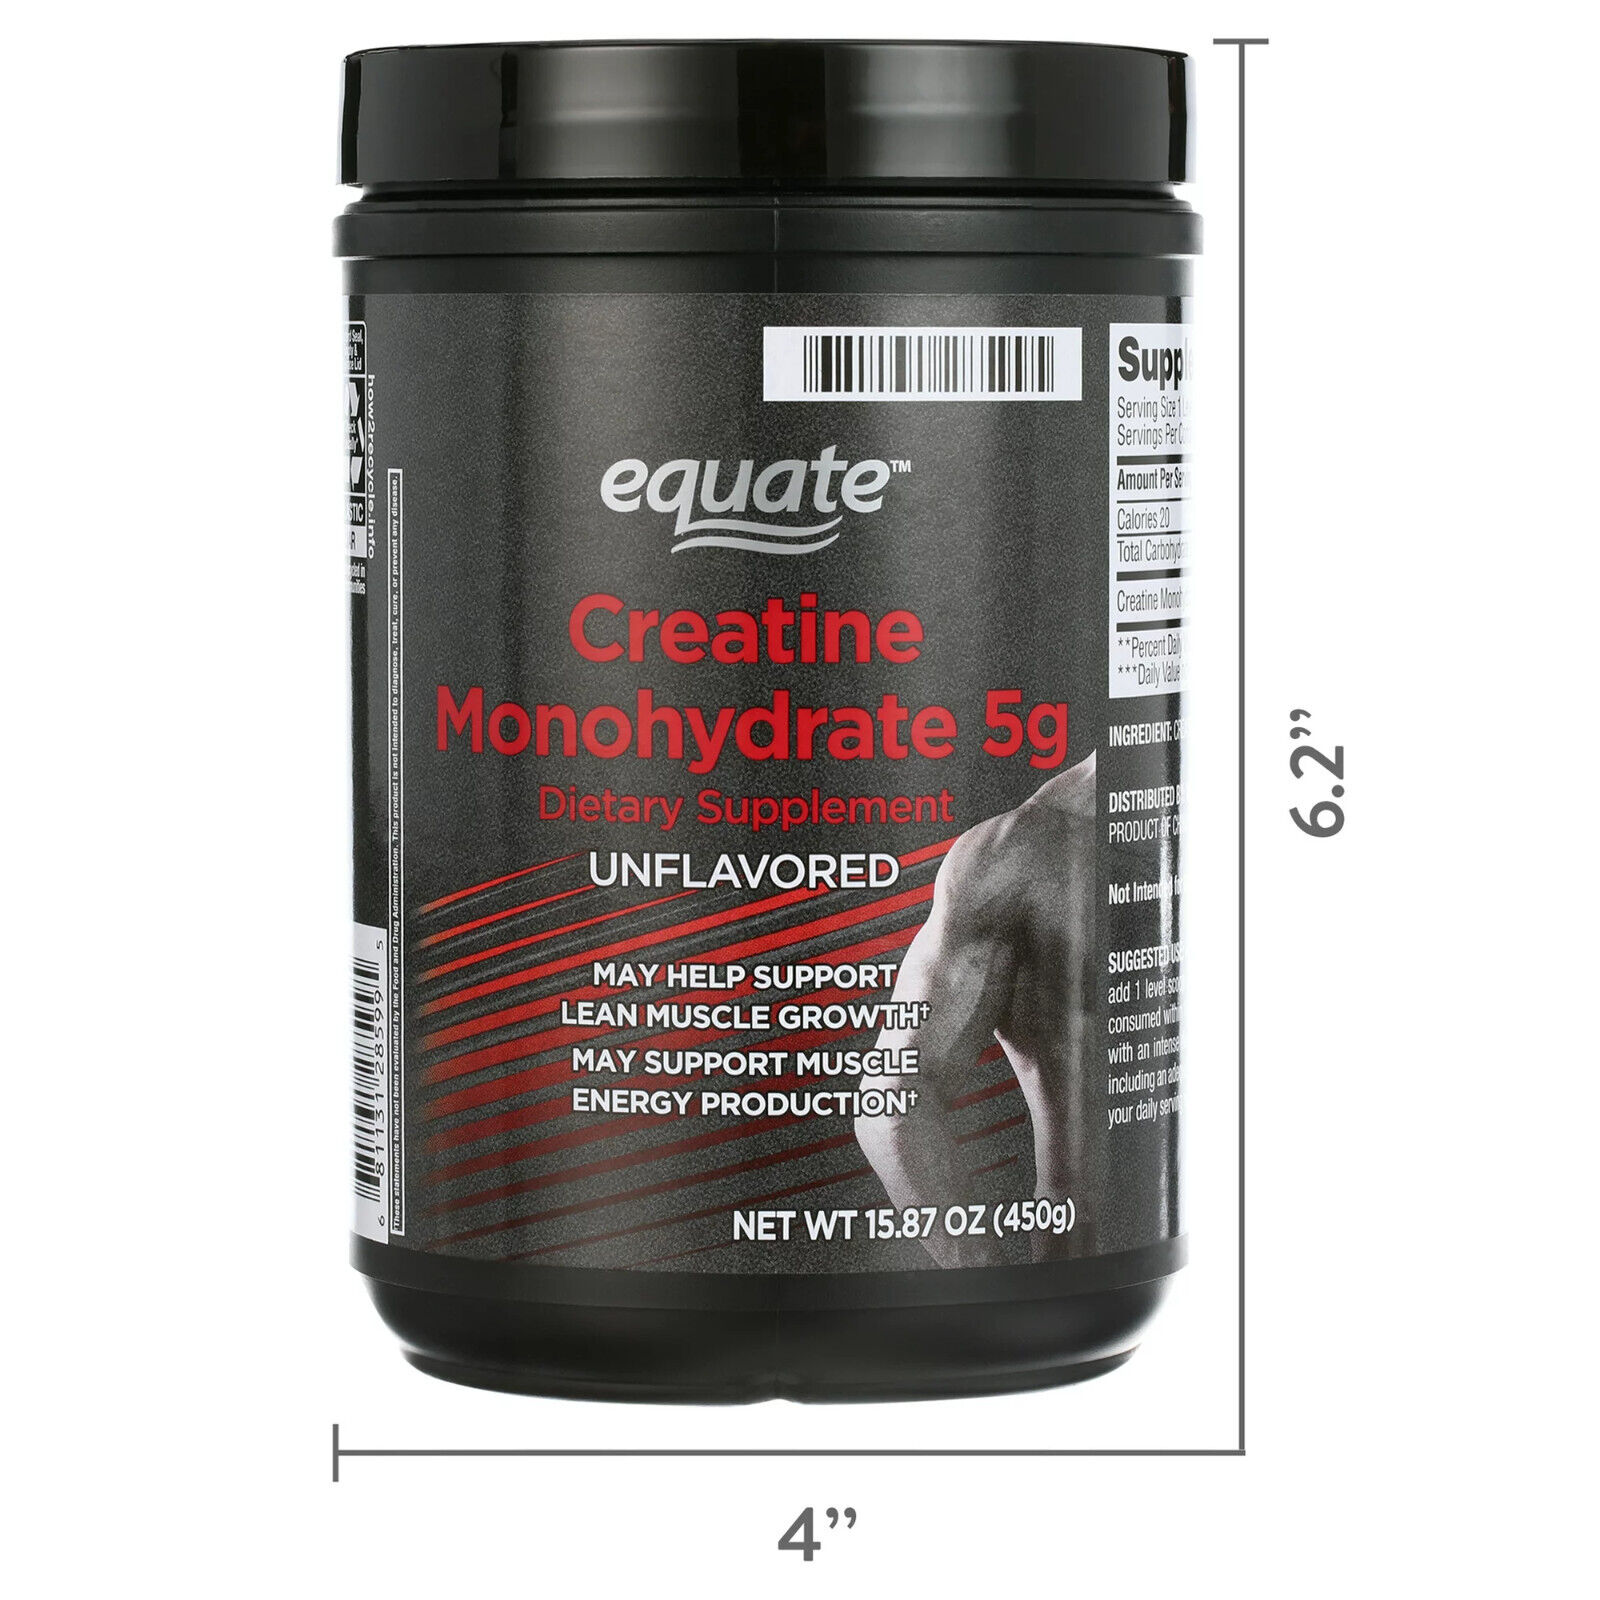 Equate Creatine Monohydrate Dietary Supplement, Unflavored, 5 g, 15.87 oz